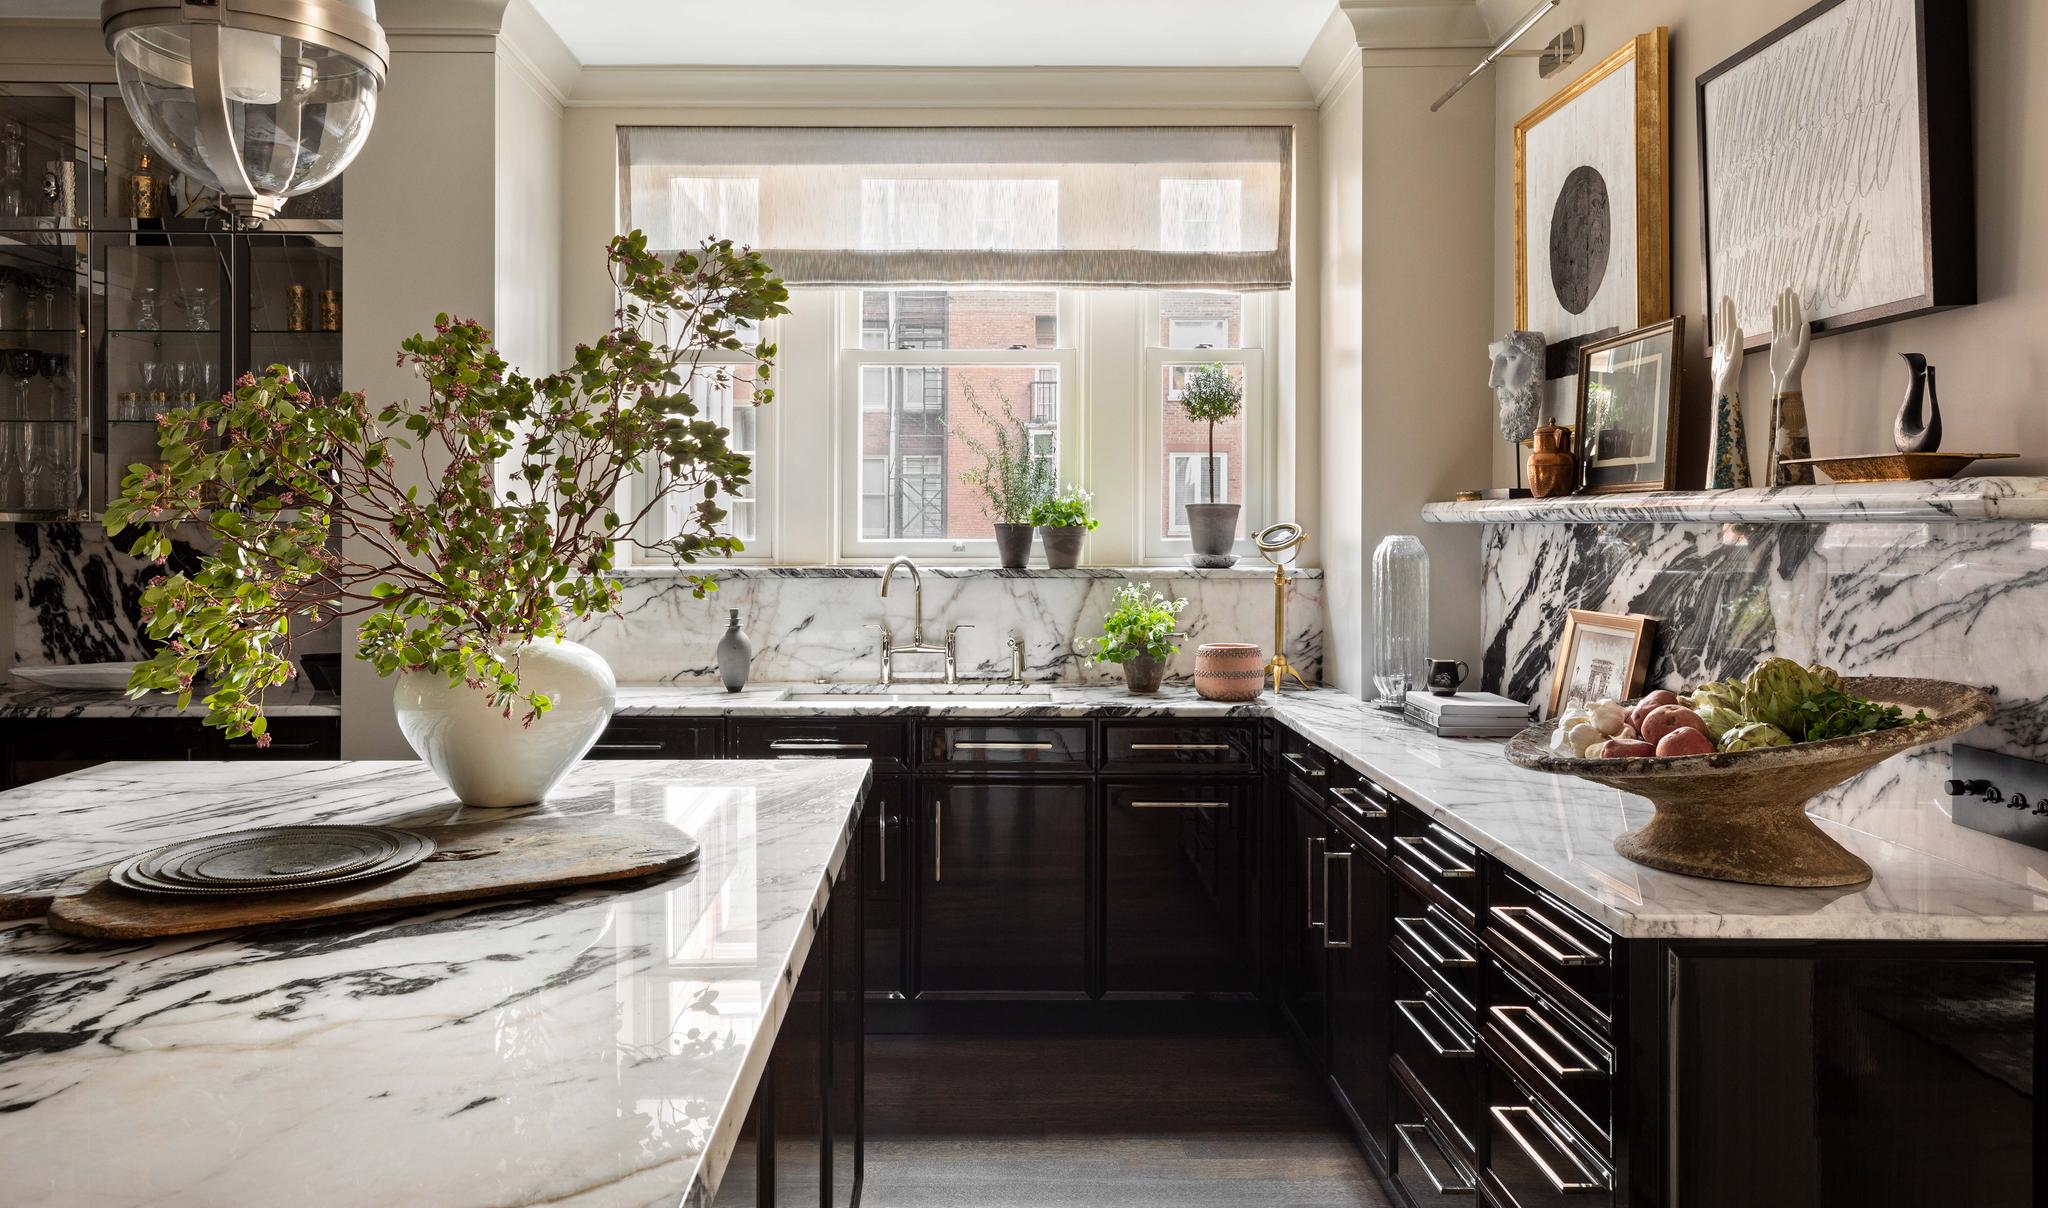 European inspired kitchen remodel in a historic 1920's Chicago co-op